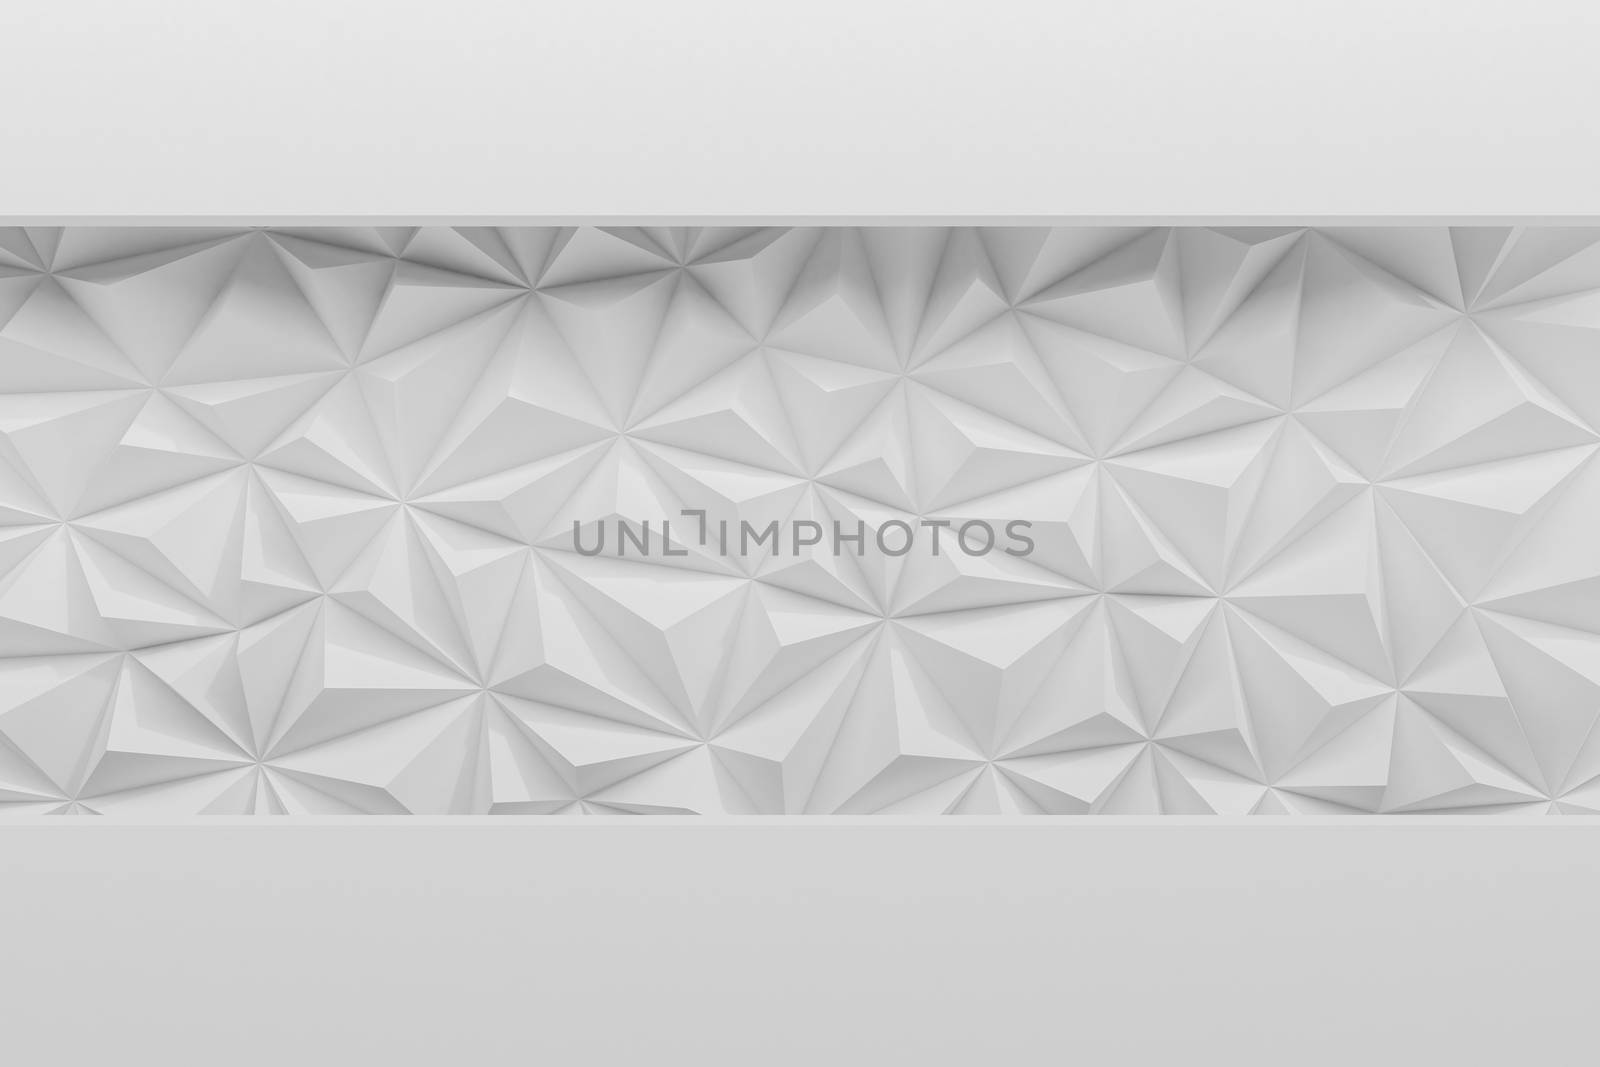 Abstract white low poly background with copy space 3d render